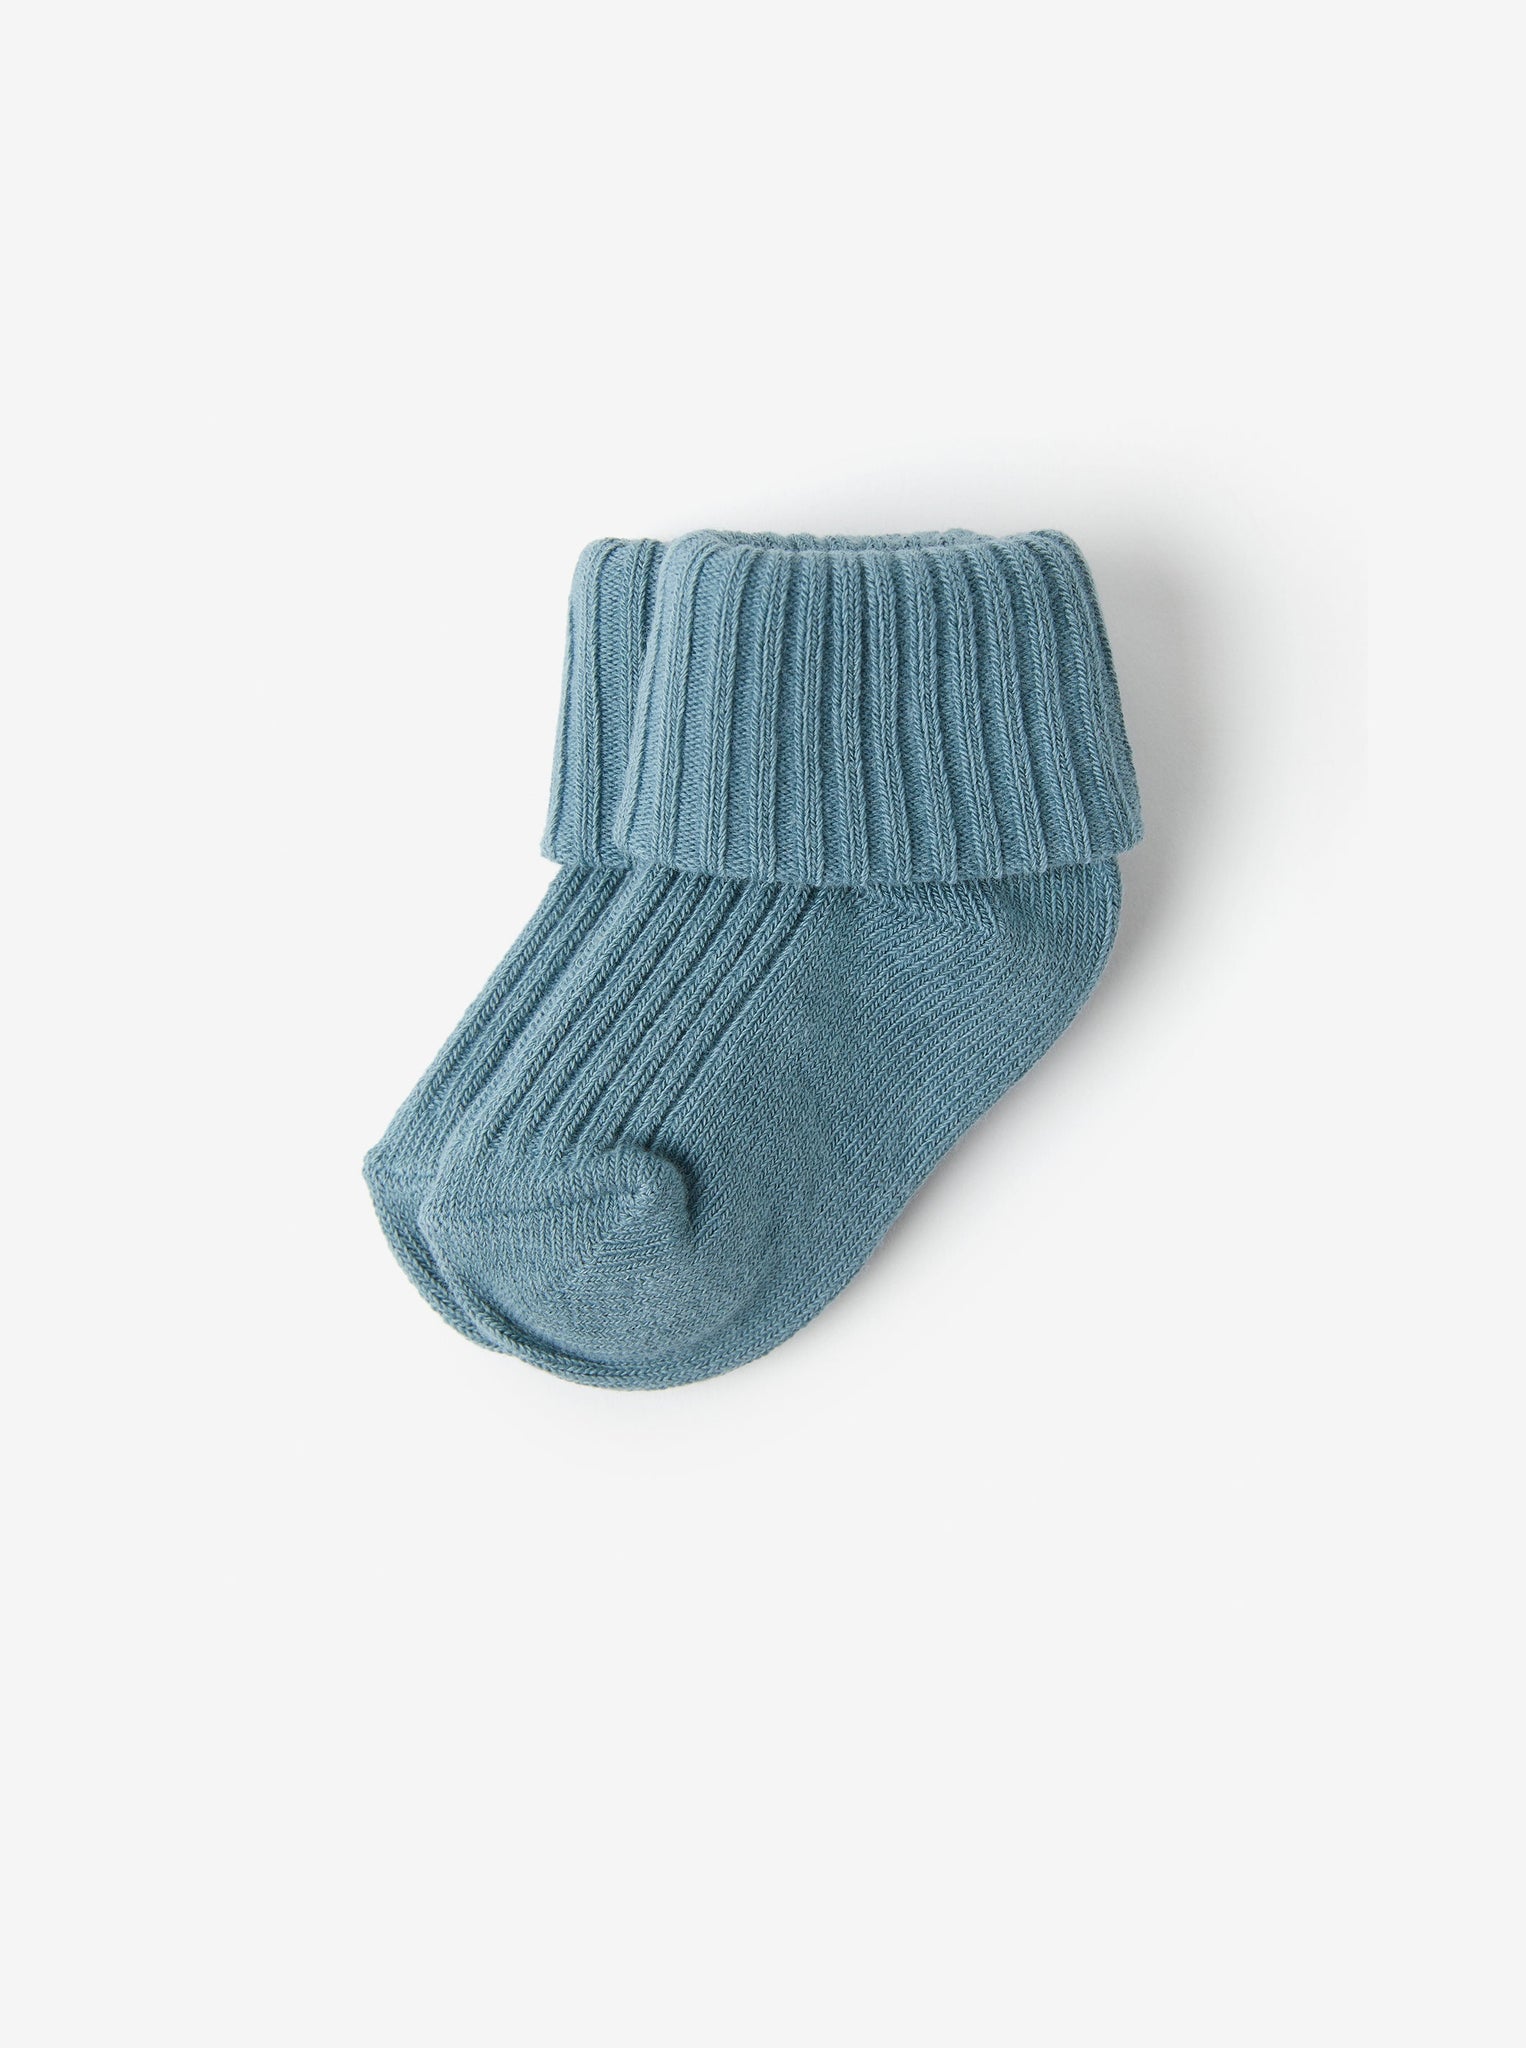 Soft Blue Baby Socks from the Polarn O. Pyret babywear collection. Ethically produced baby clothing.